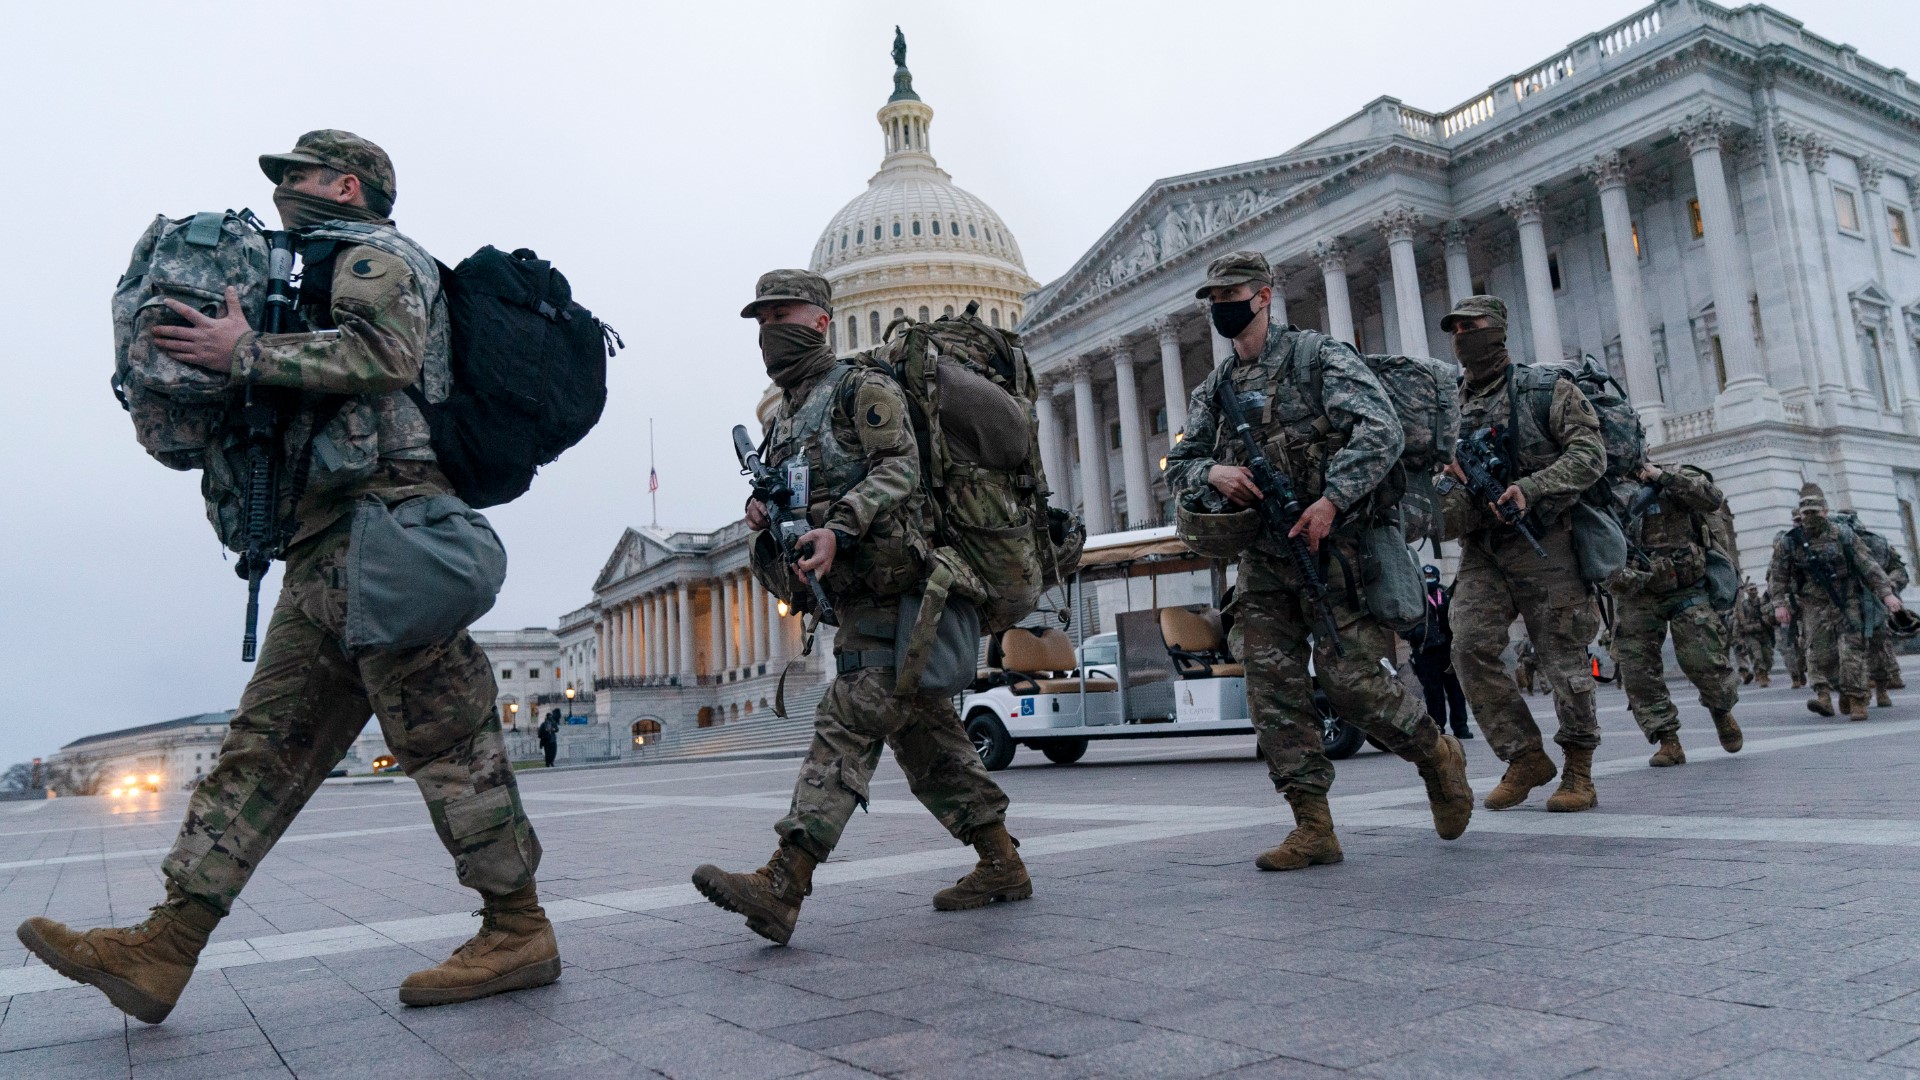 As the nation's capital decreased its inauguration security posture, a U.S. official said approximately 150 National Guard troops tested positive for coronavirus.